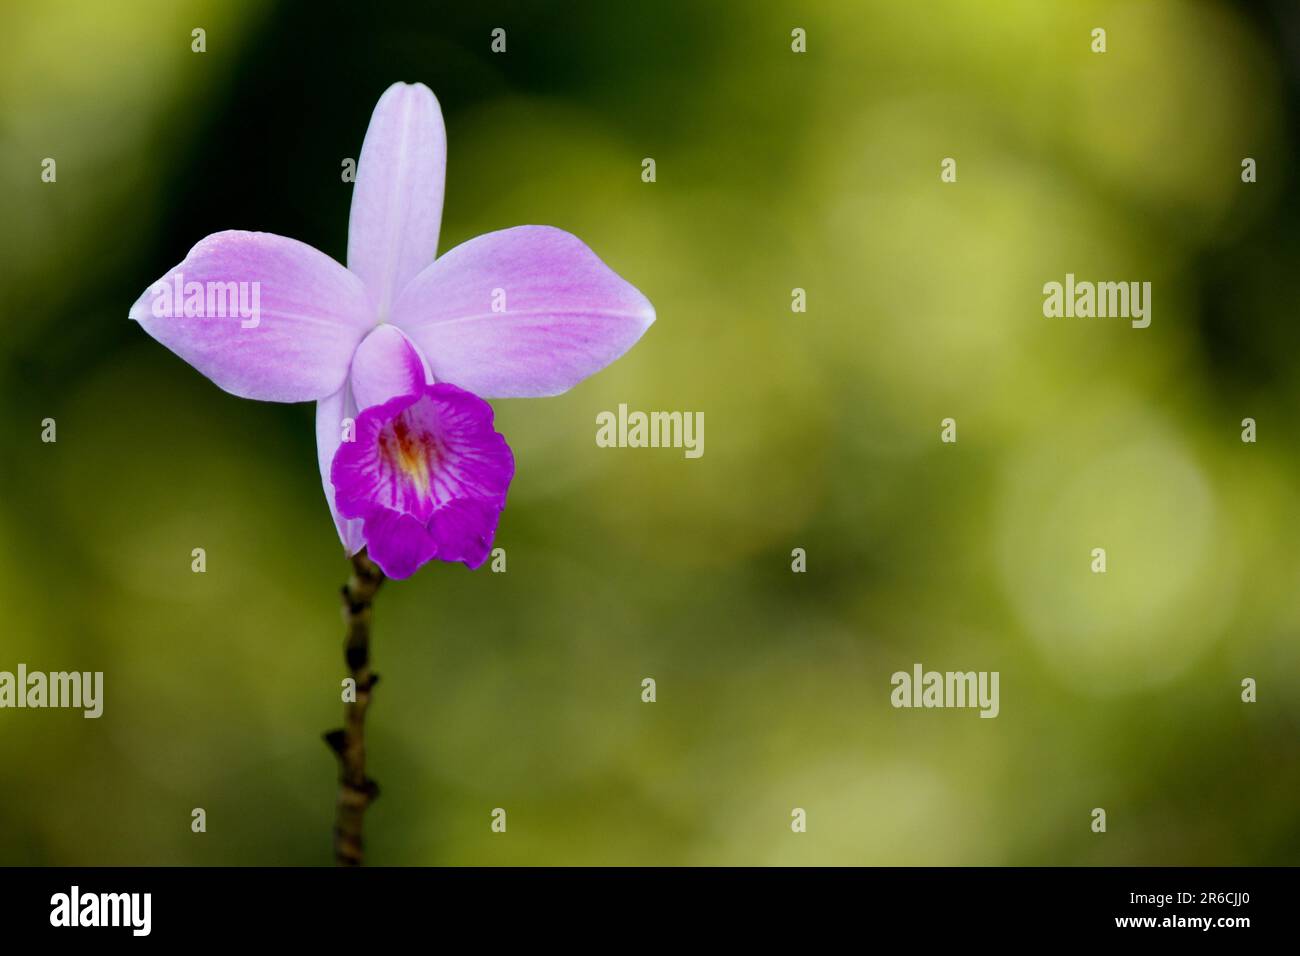 Close-up shot of an Arundina graminifolia orchid, showcasing its delicate beauty against a blurred green background Stock Photo